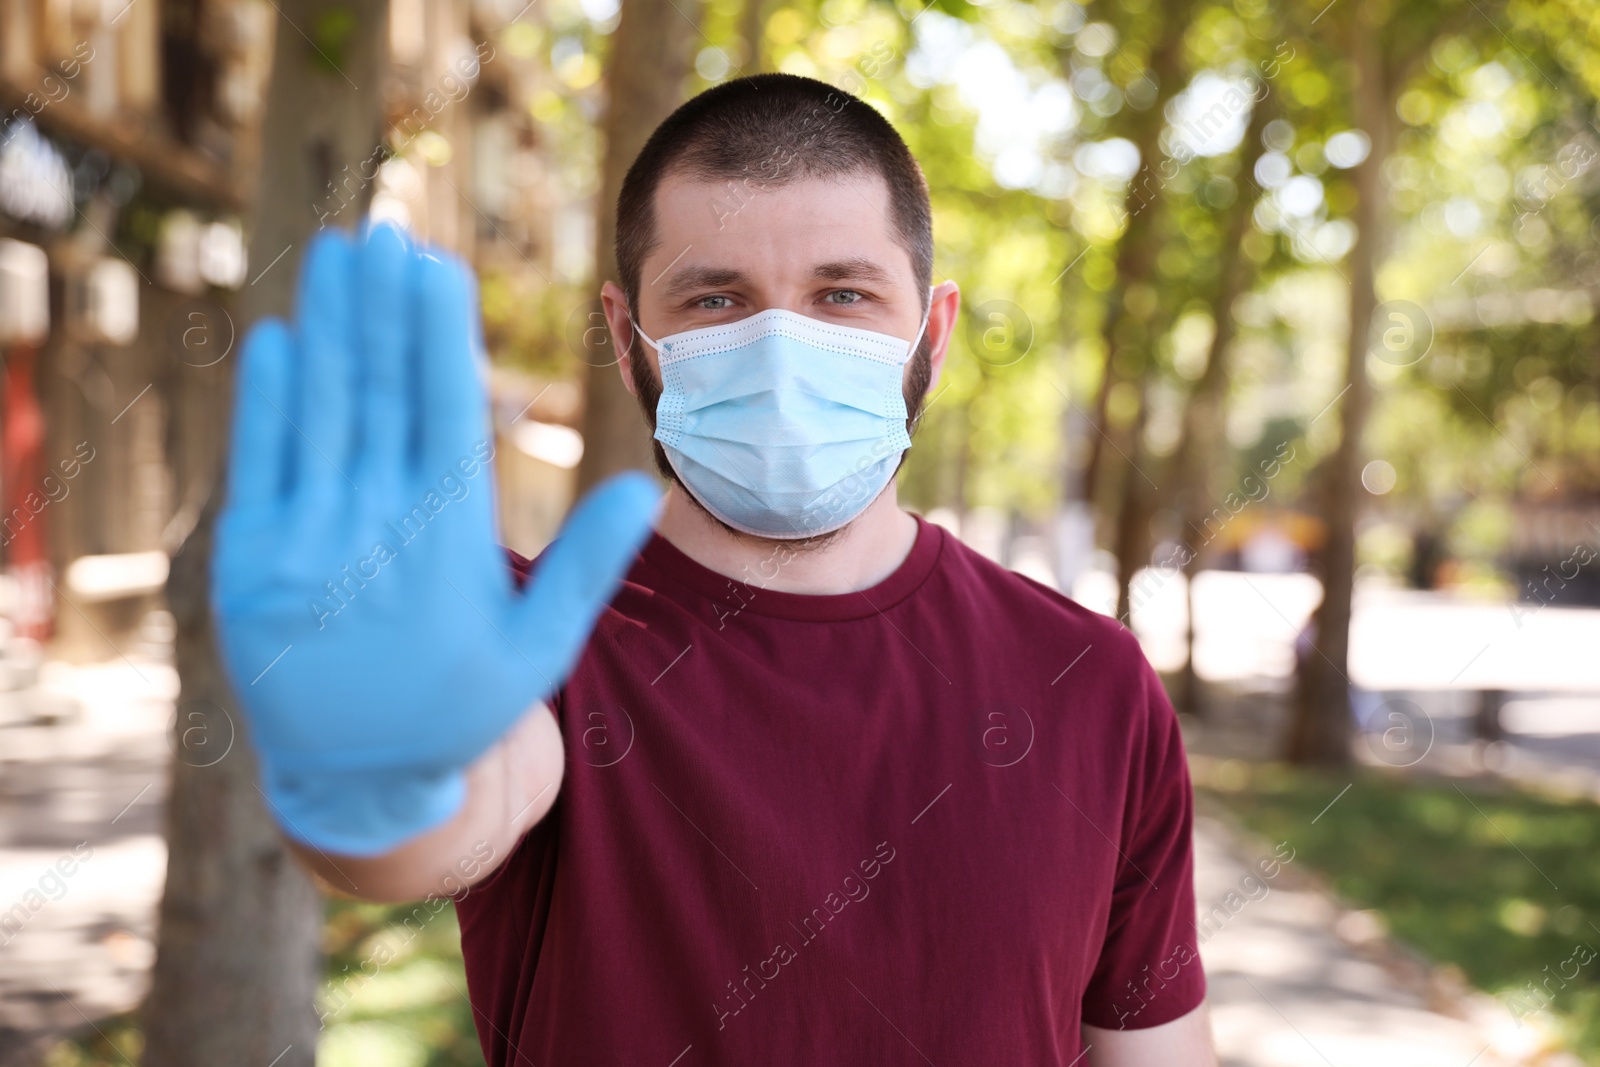 Photo of Man in protective face mask showing stop gesture outdoors. Prevent spreading of coronavirus